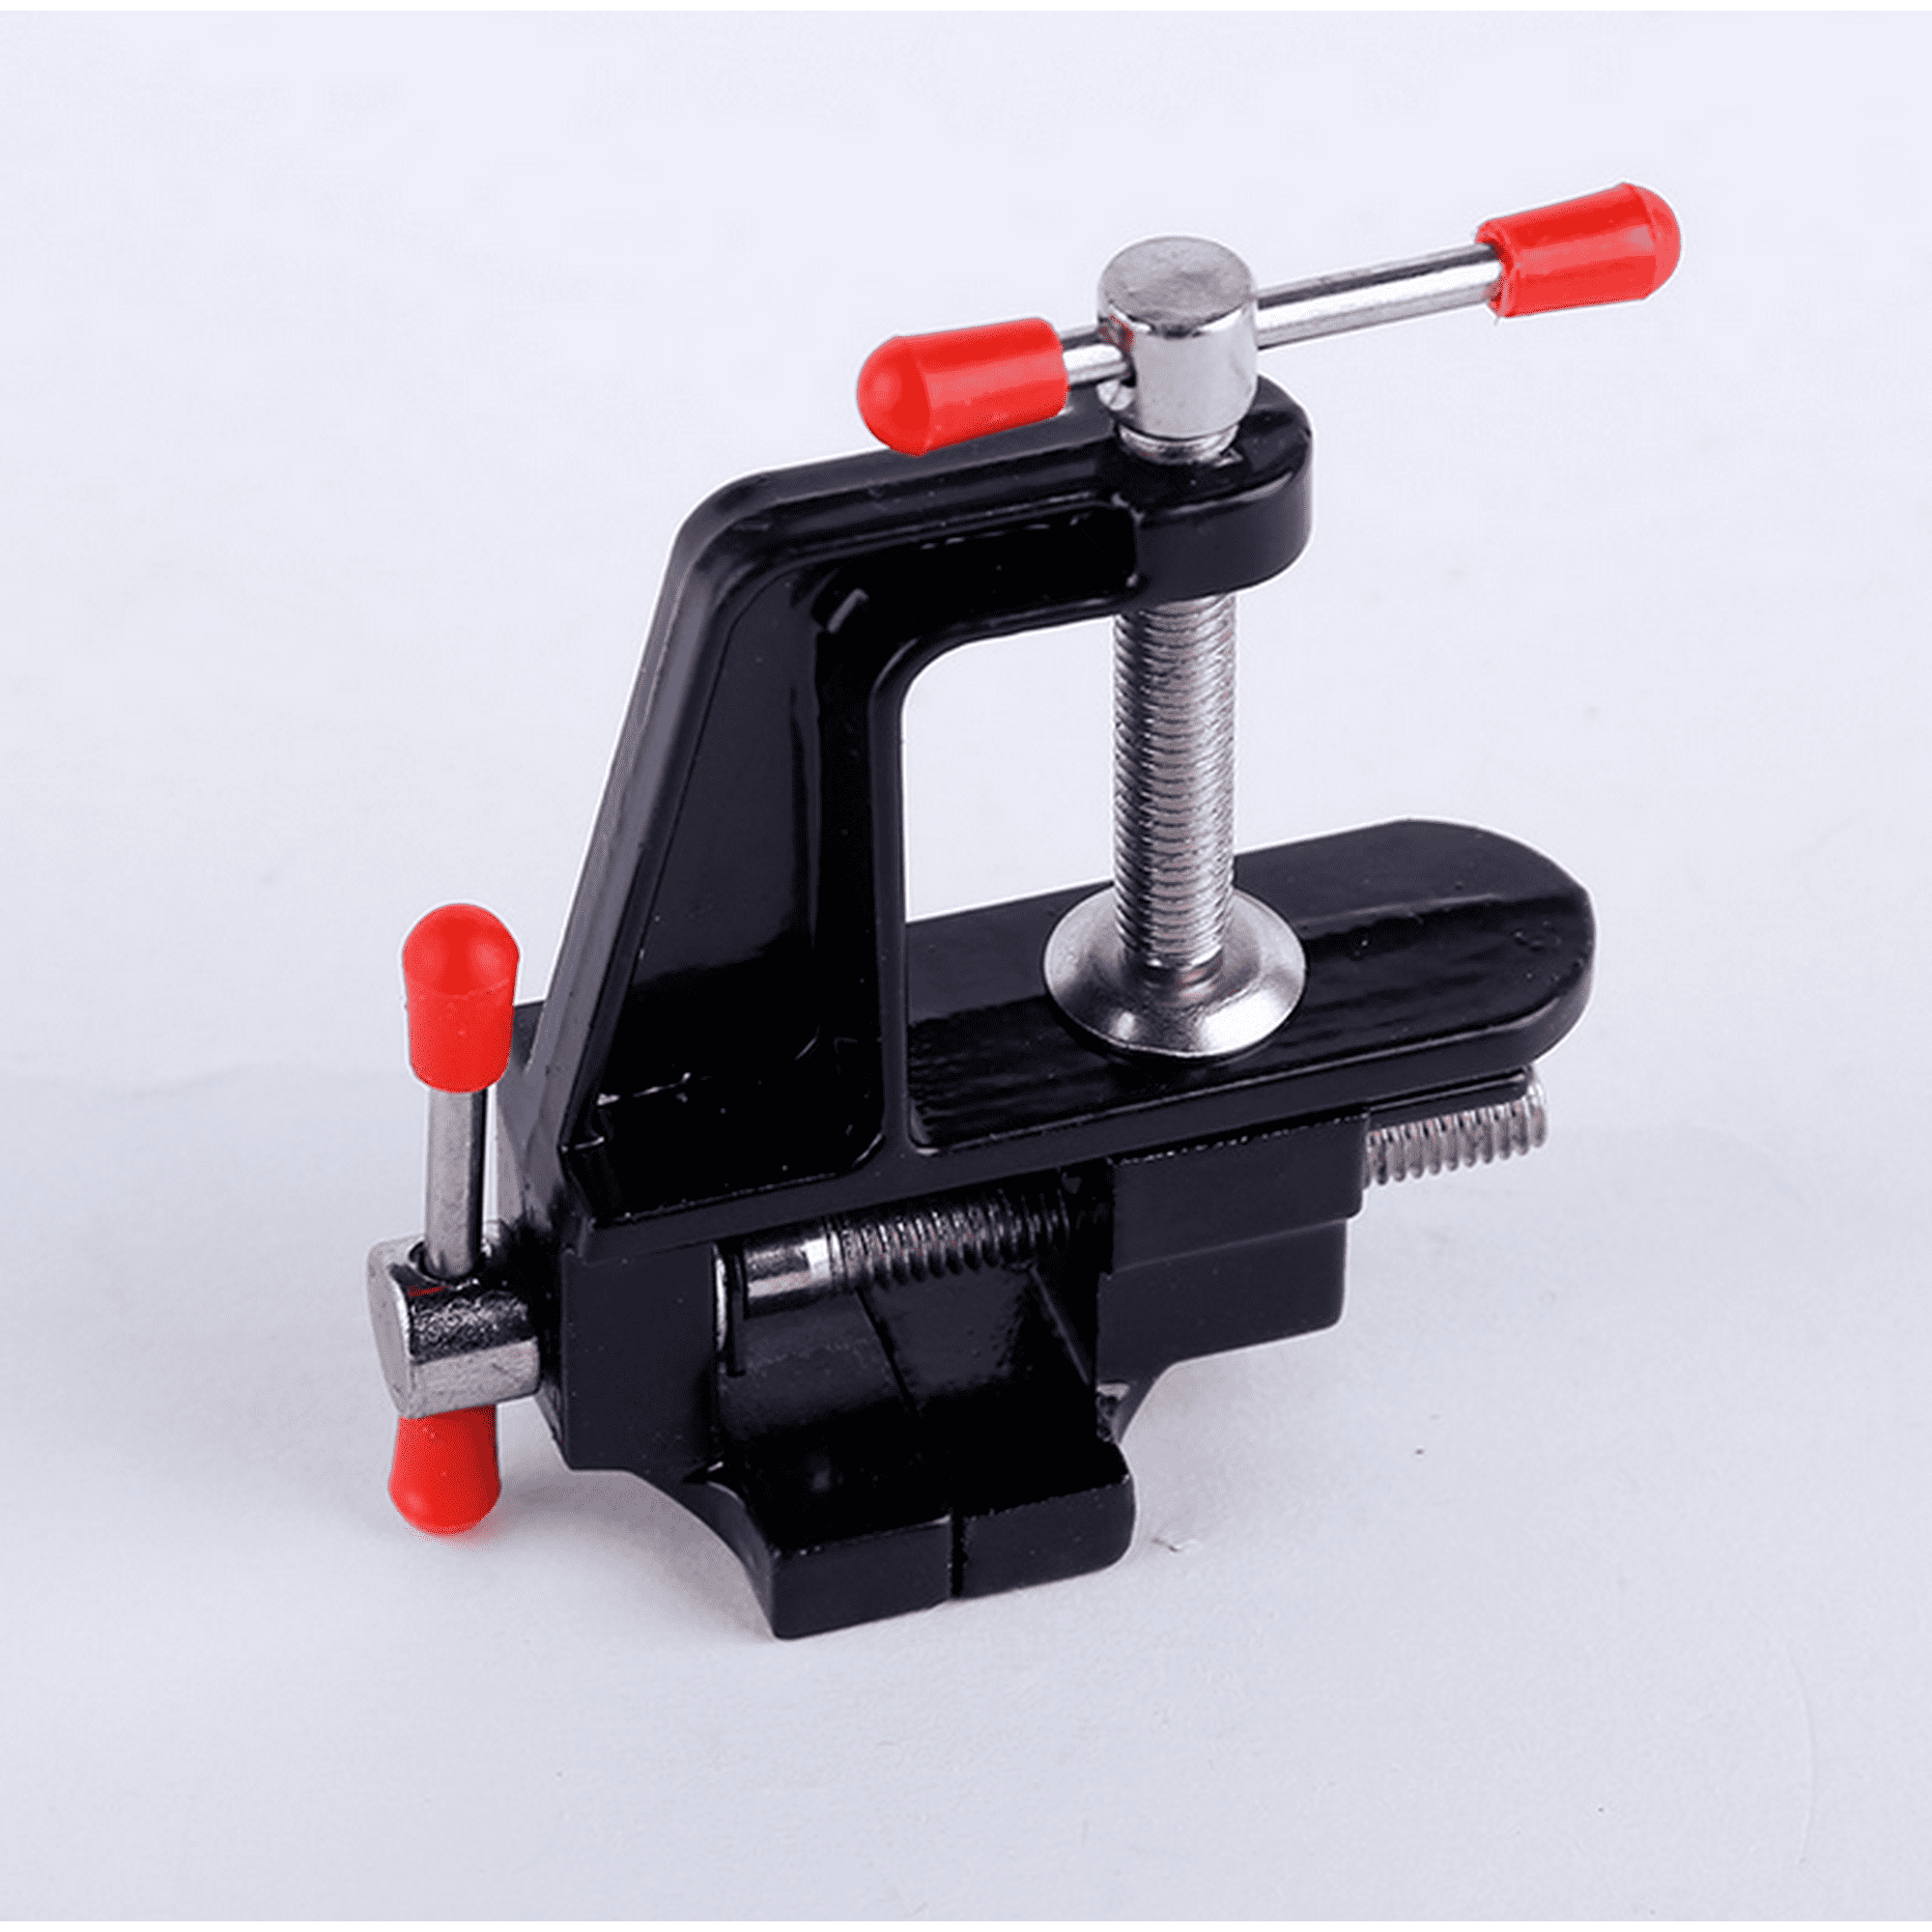 Clamping System Jewelers Tool 2-3/8'' Aluminum Table Vise Table Clamp Vice Jaw